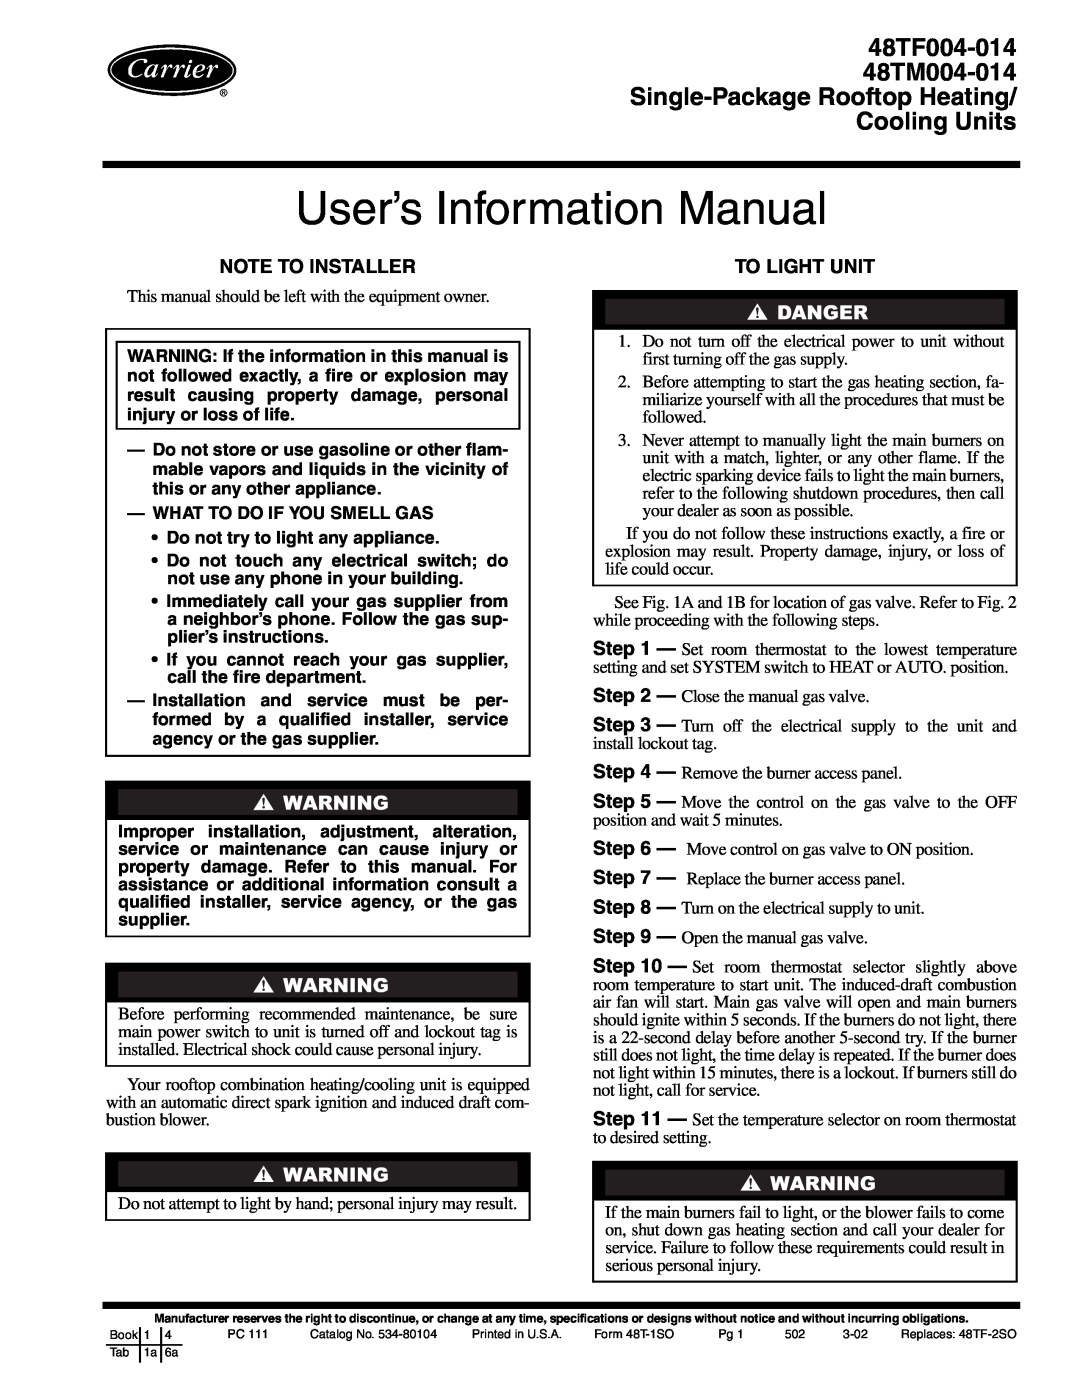 Carrier 48TM004-014, 48TF004-014 specifications Note To Installer, To Light Unit, User’s Information Manual 